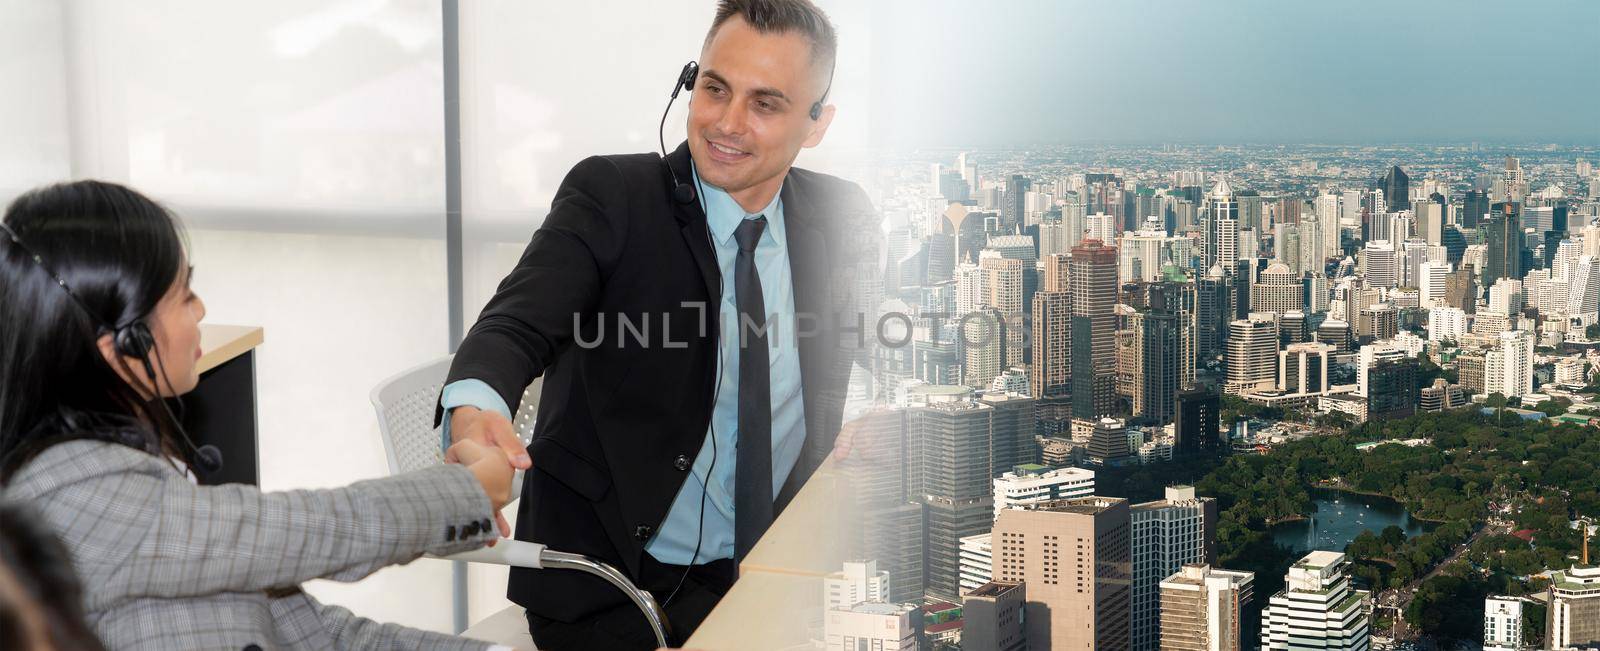 Business people wearing headset celebrate working in office . Call center, telemarketing, customer support agent provide service on telephone video conference call. broaden view